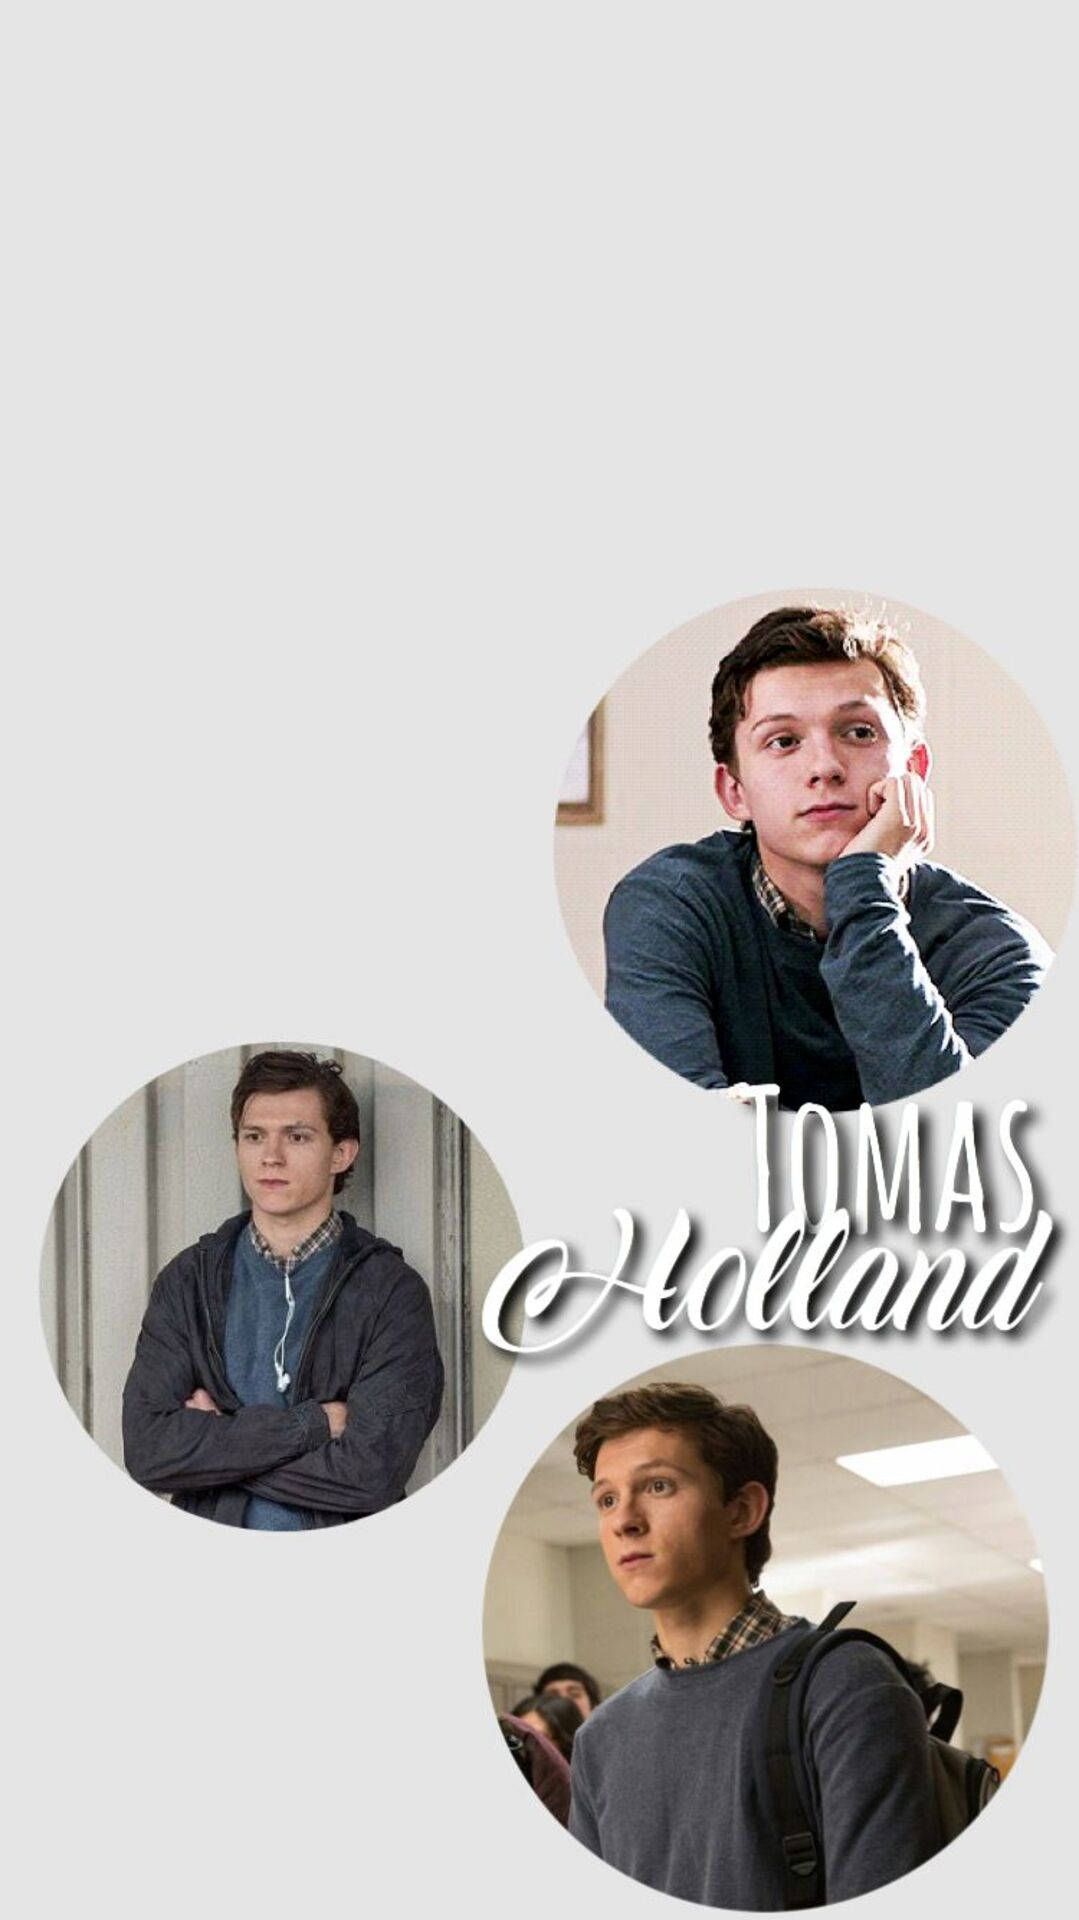 Tom holland phone wallpaper by me - Tom Holland